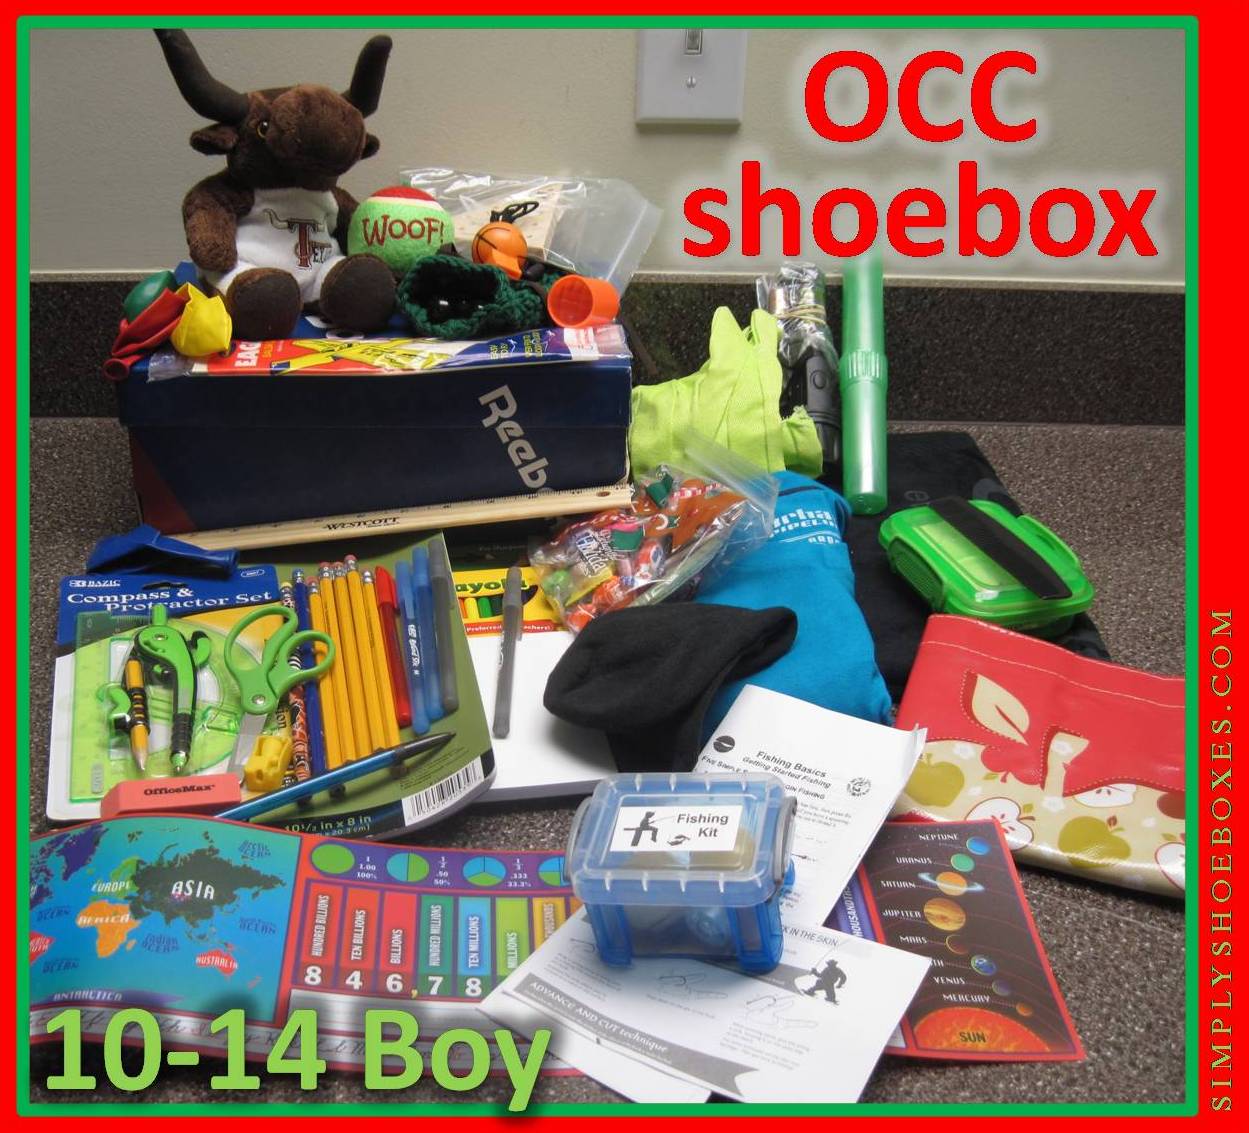 Simply Shoeboxes: Example of What to Pack in an OCC Shoebox for 10